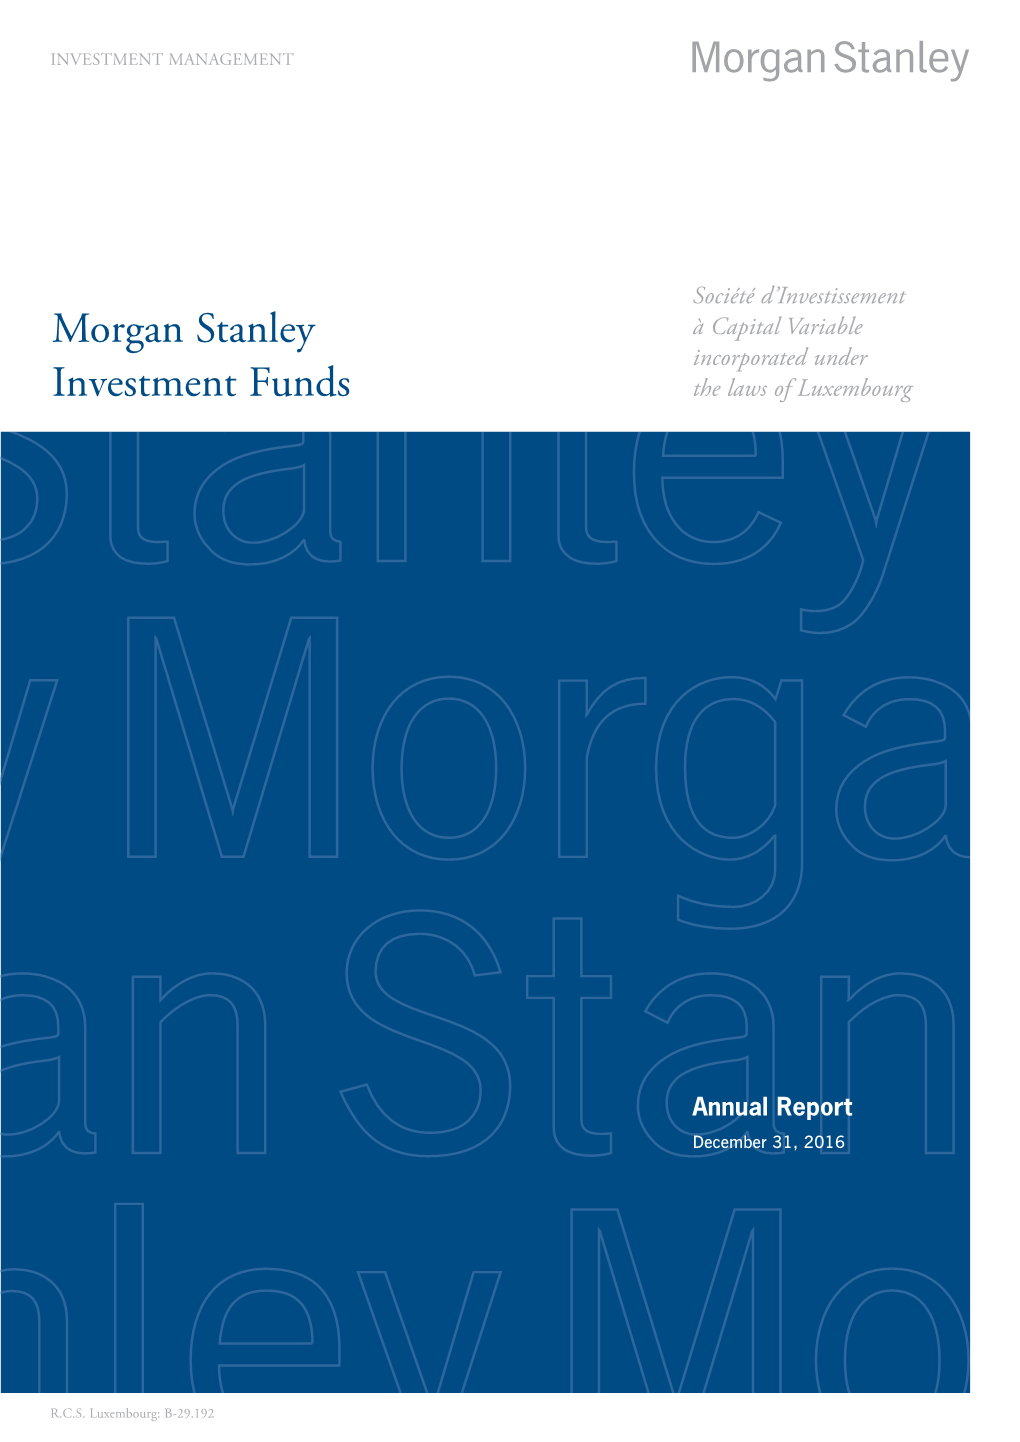 Morgan Stanley Investment Funds 31 December 2016